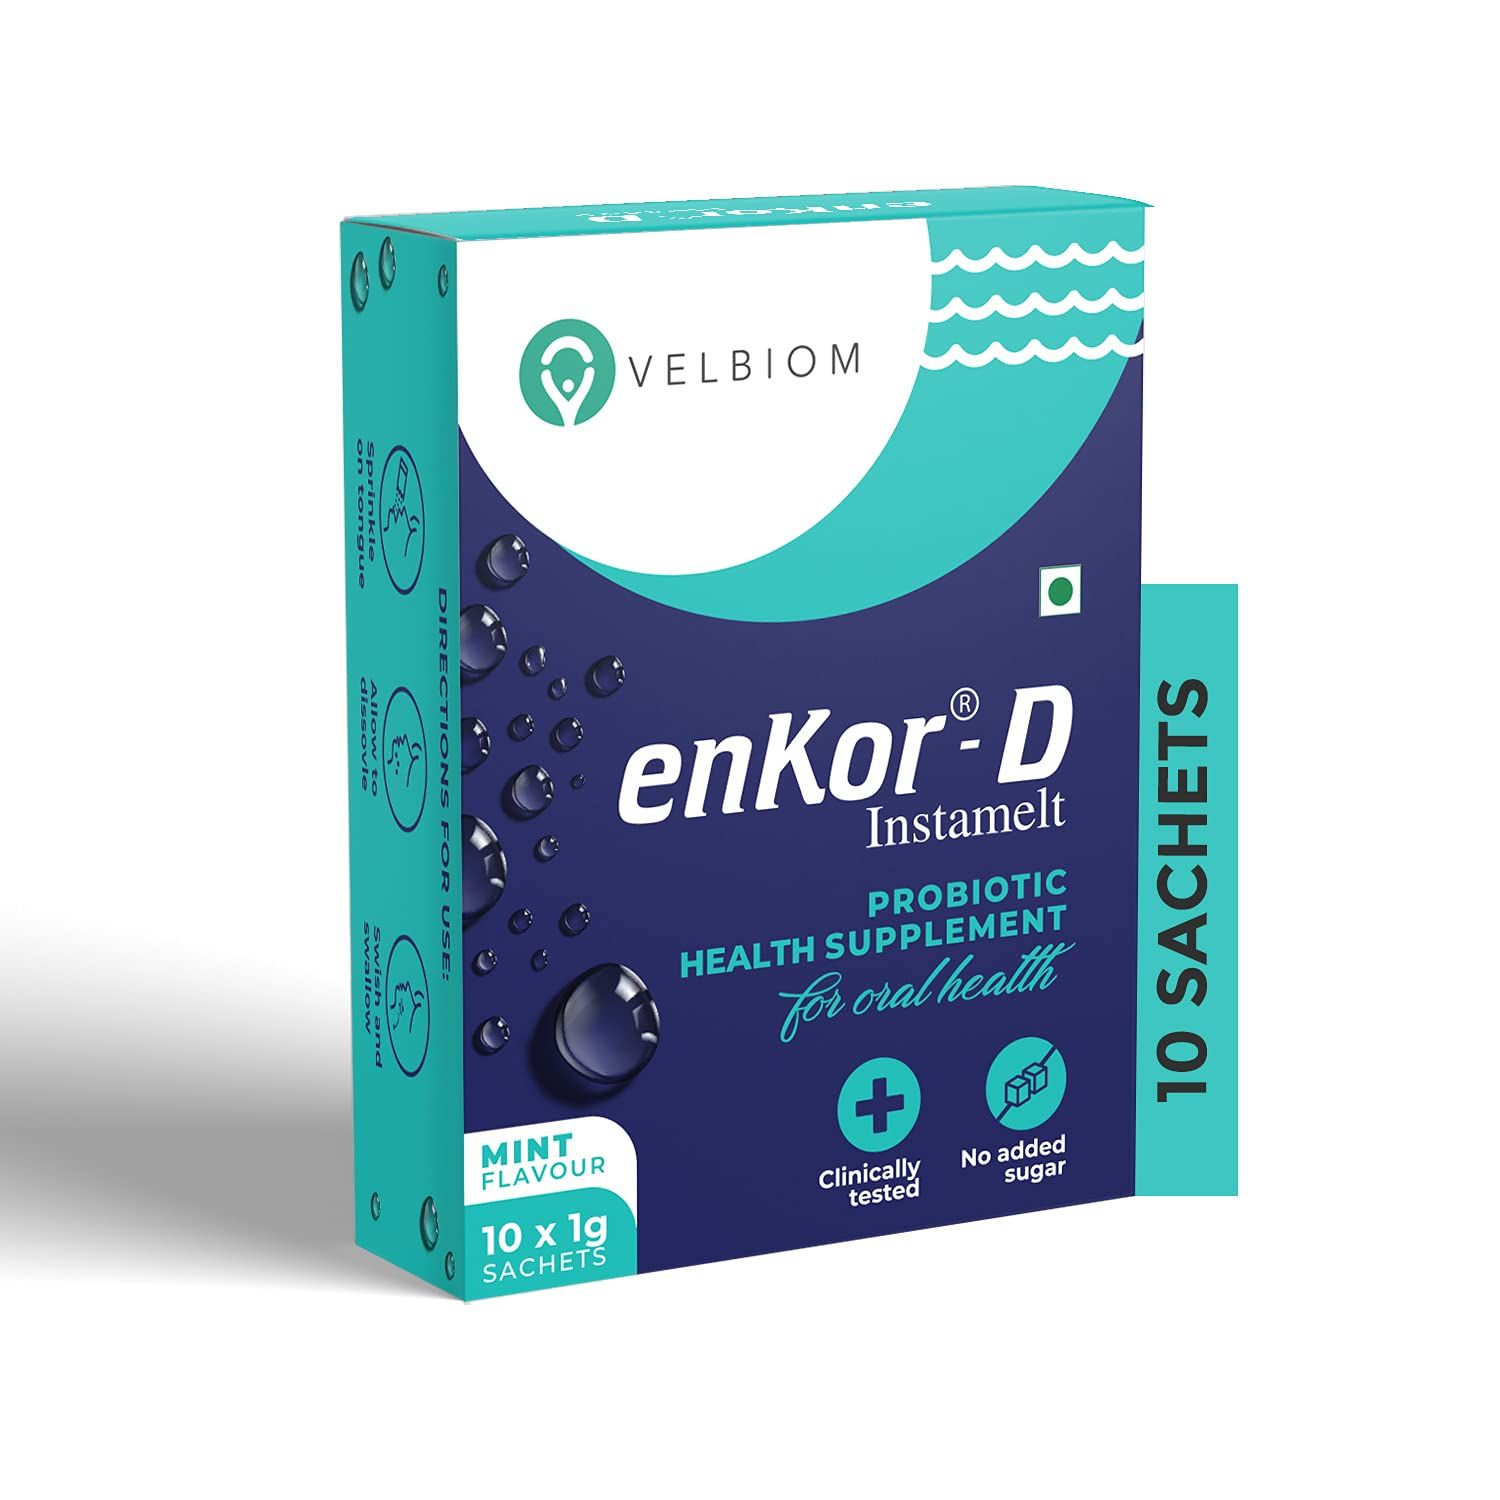 Velbiom Enkor D Immunity Boosting Daily Probiotic For Oral Health Image